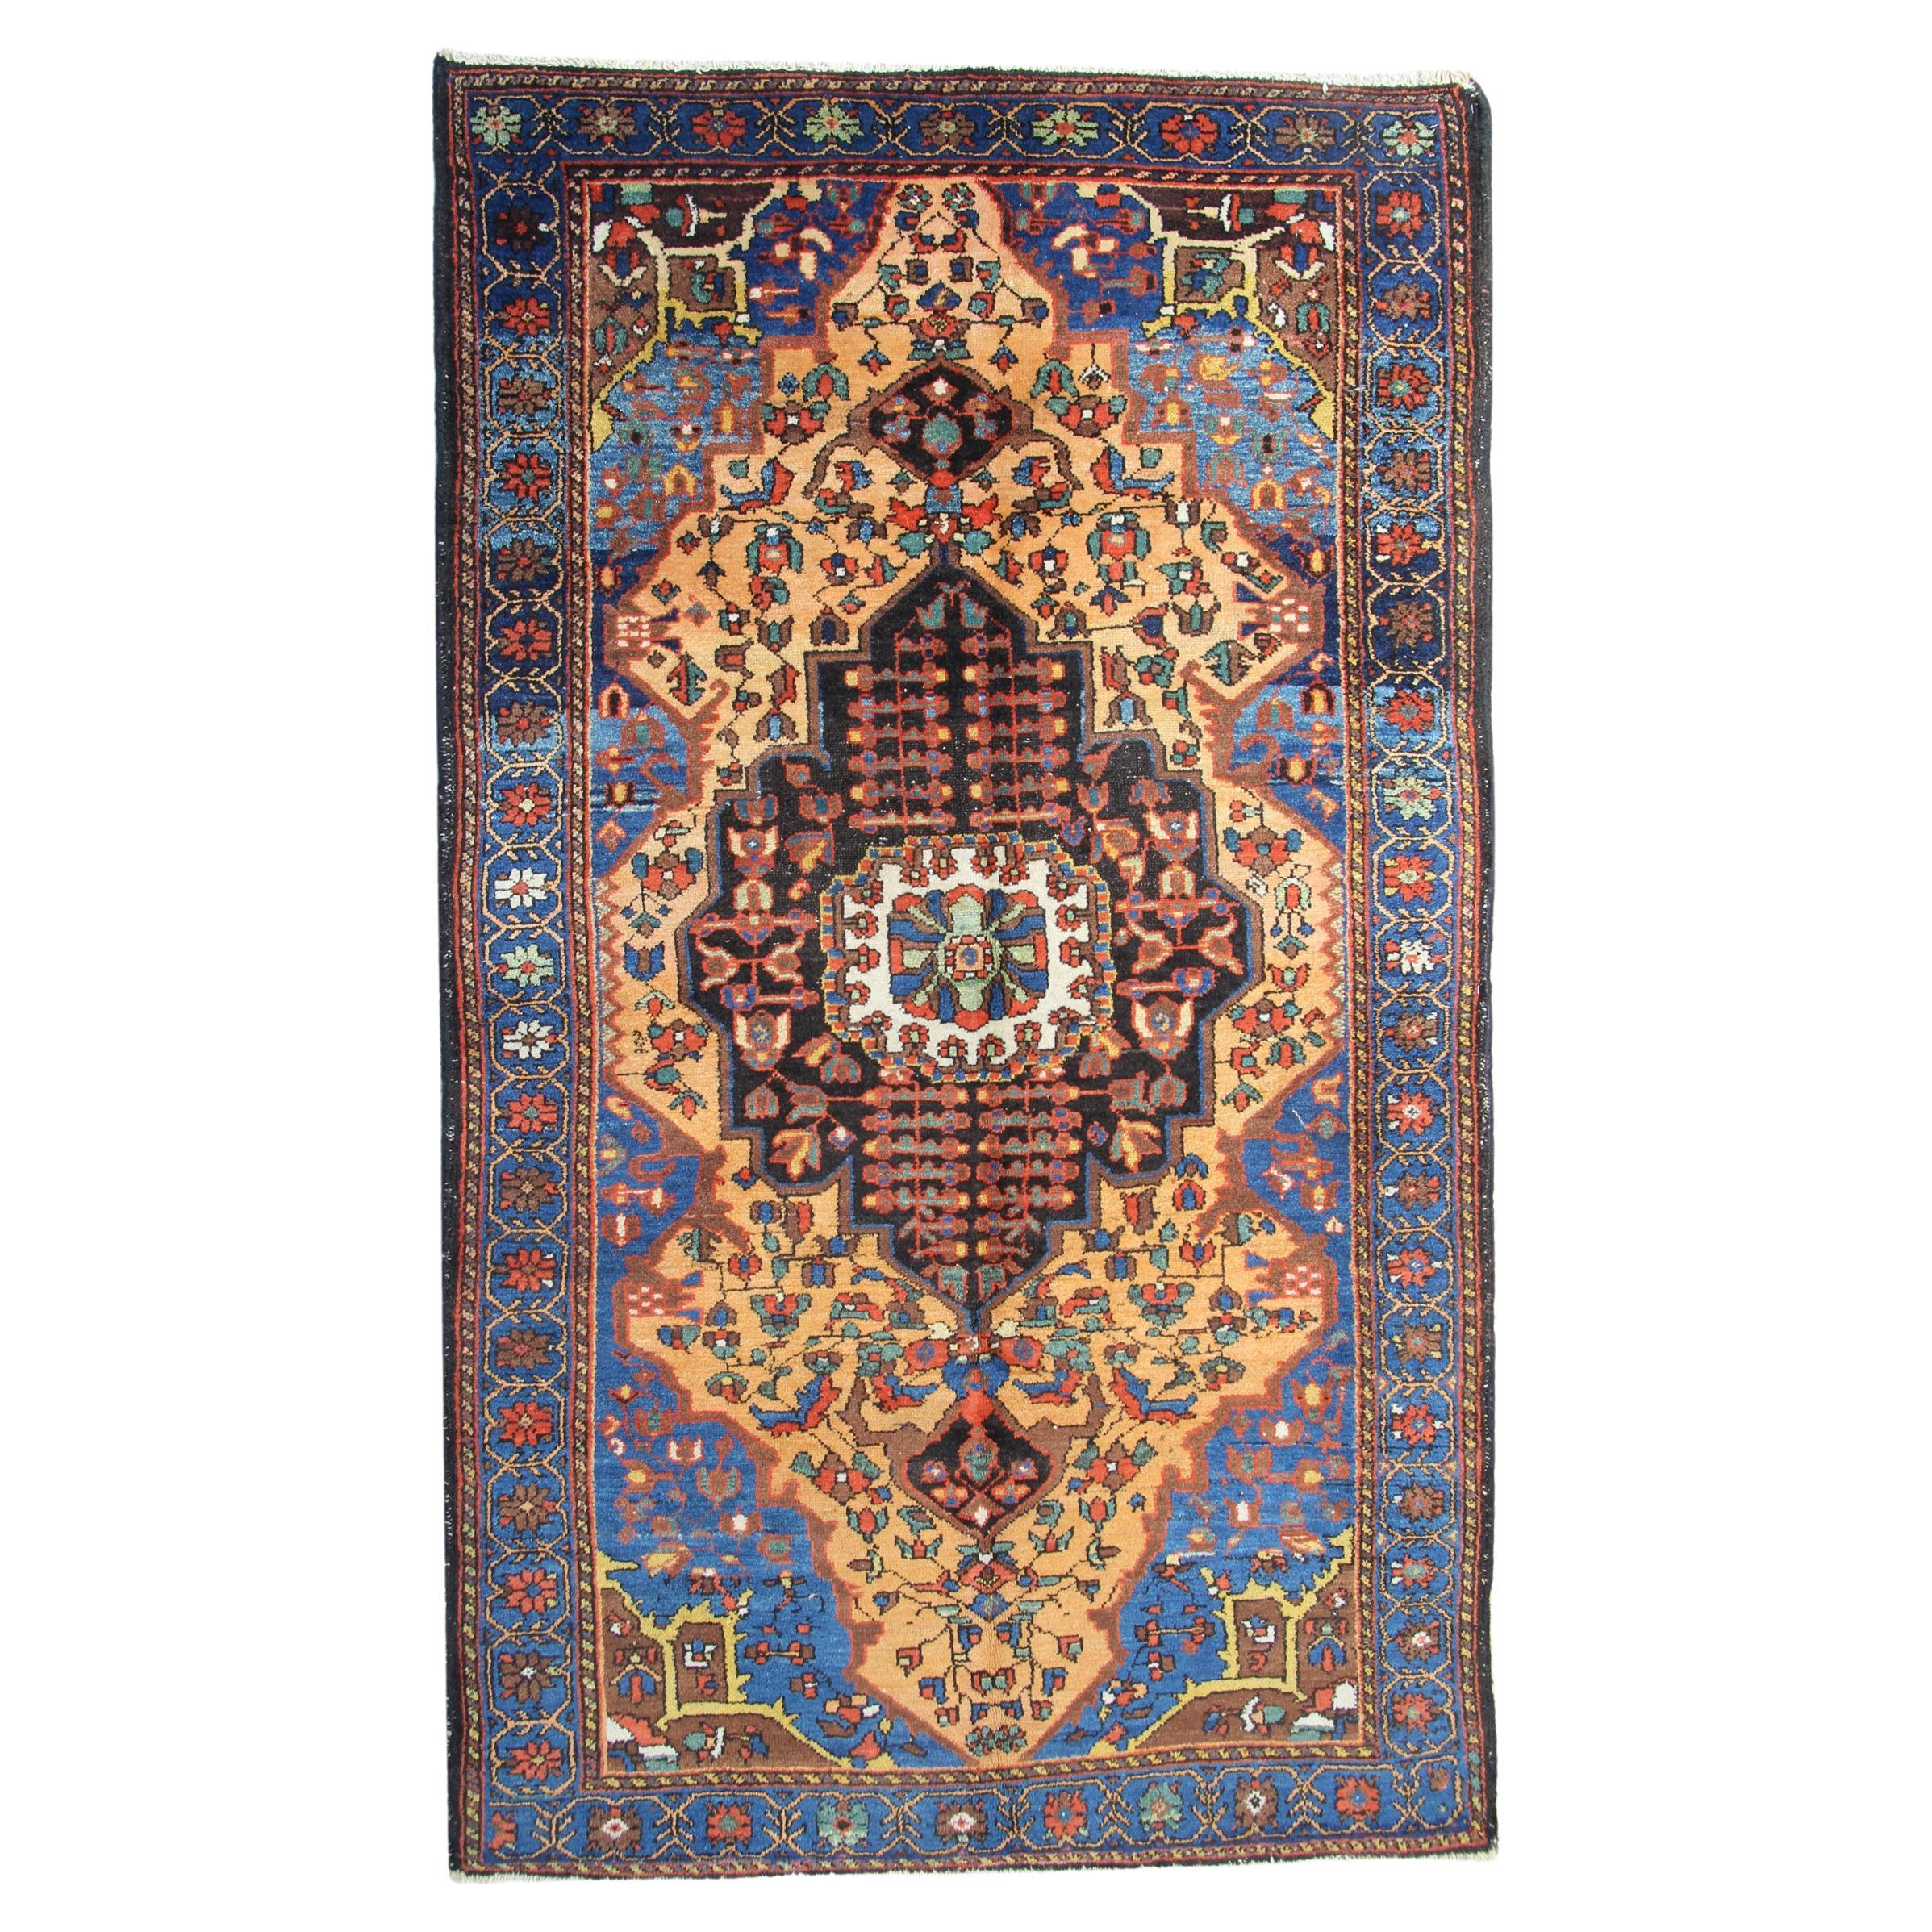 Handmade Carpet Antique Rug Traditional Yellow Rug Wool Living Room 133x193cm For Sale